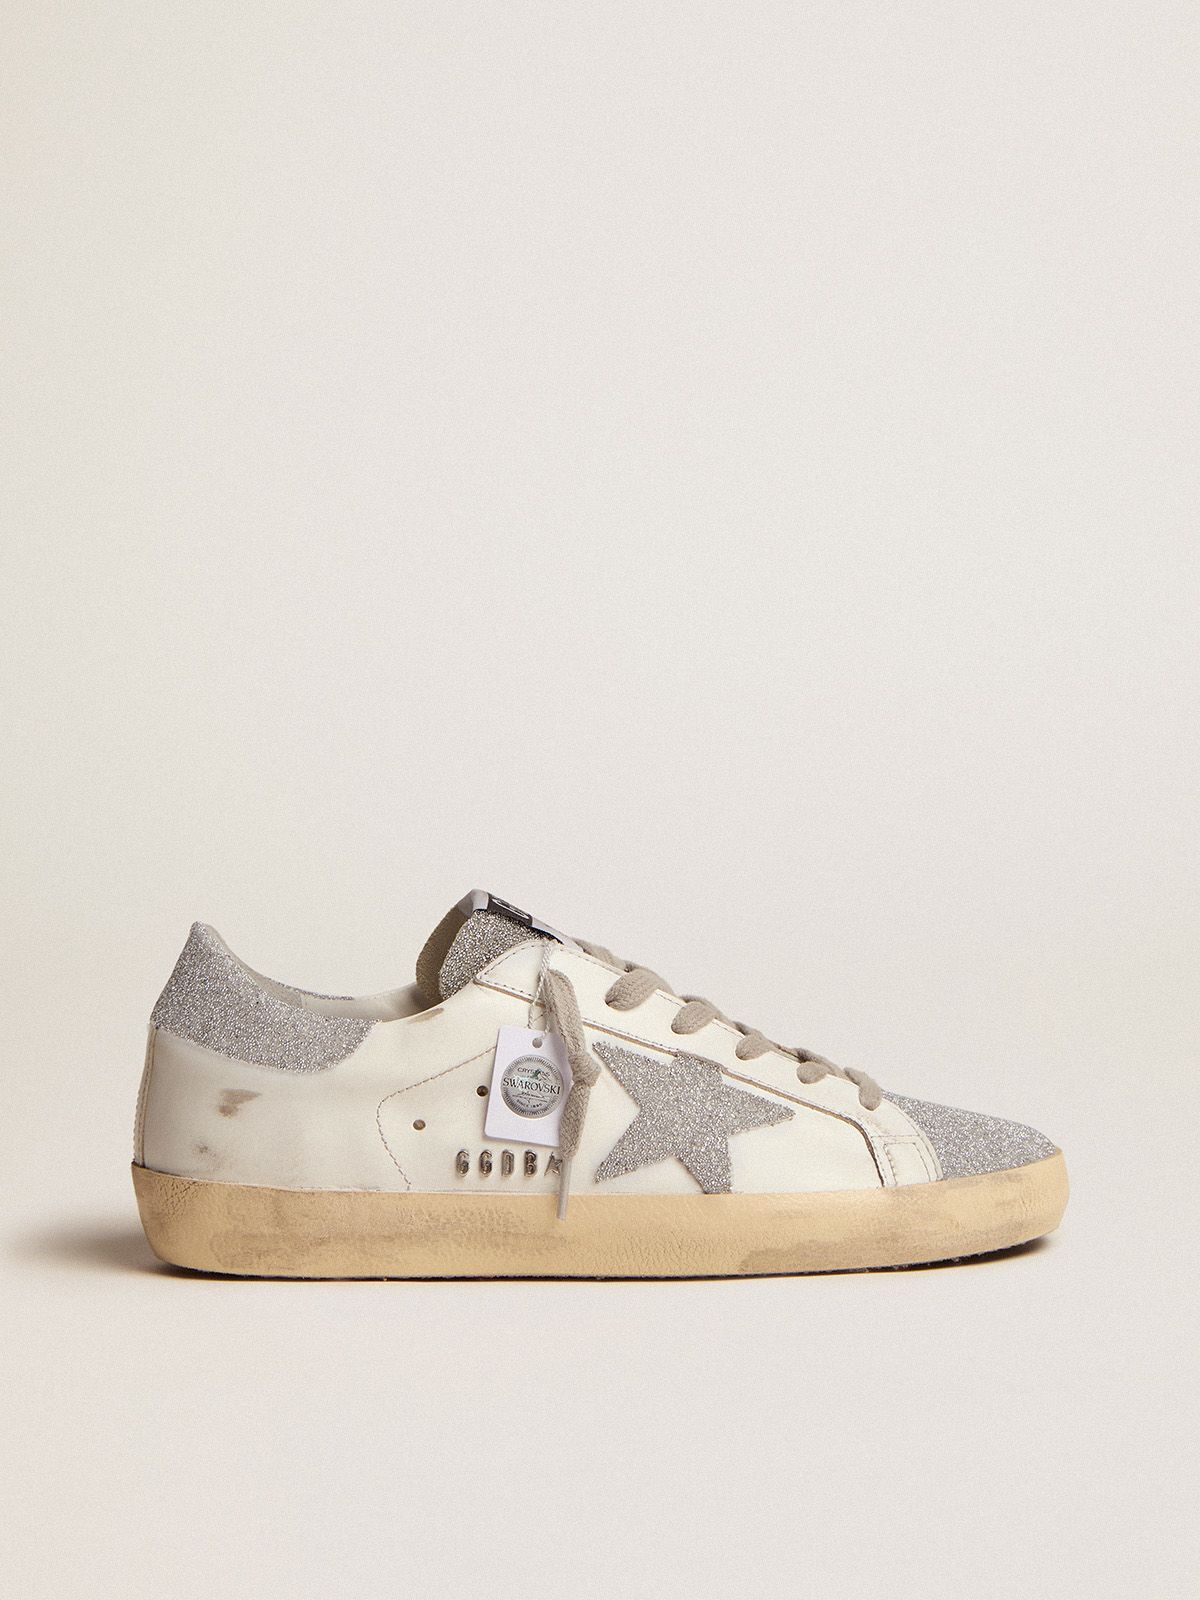 golden goose crystal and sneakers Swarovski leather Super-Star white inserts upper with